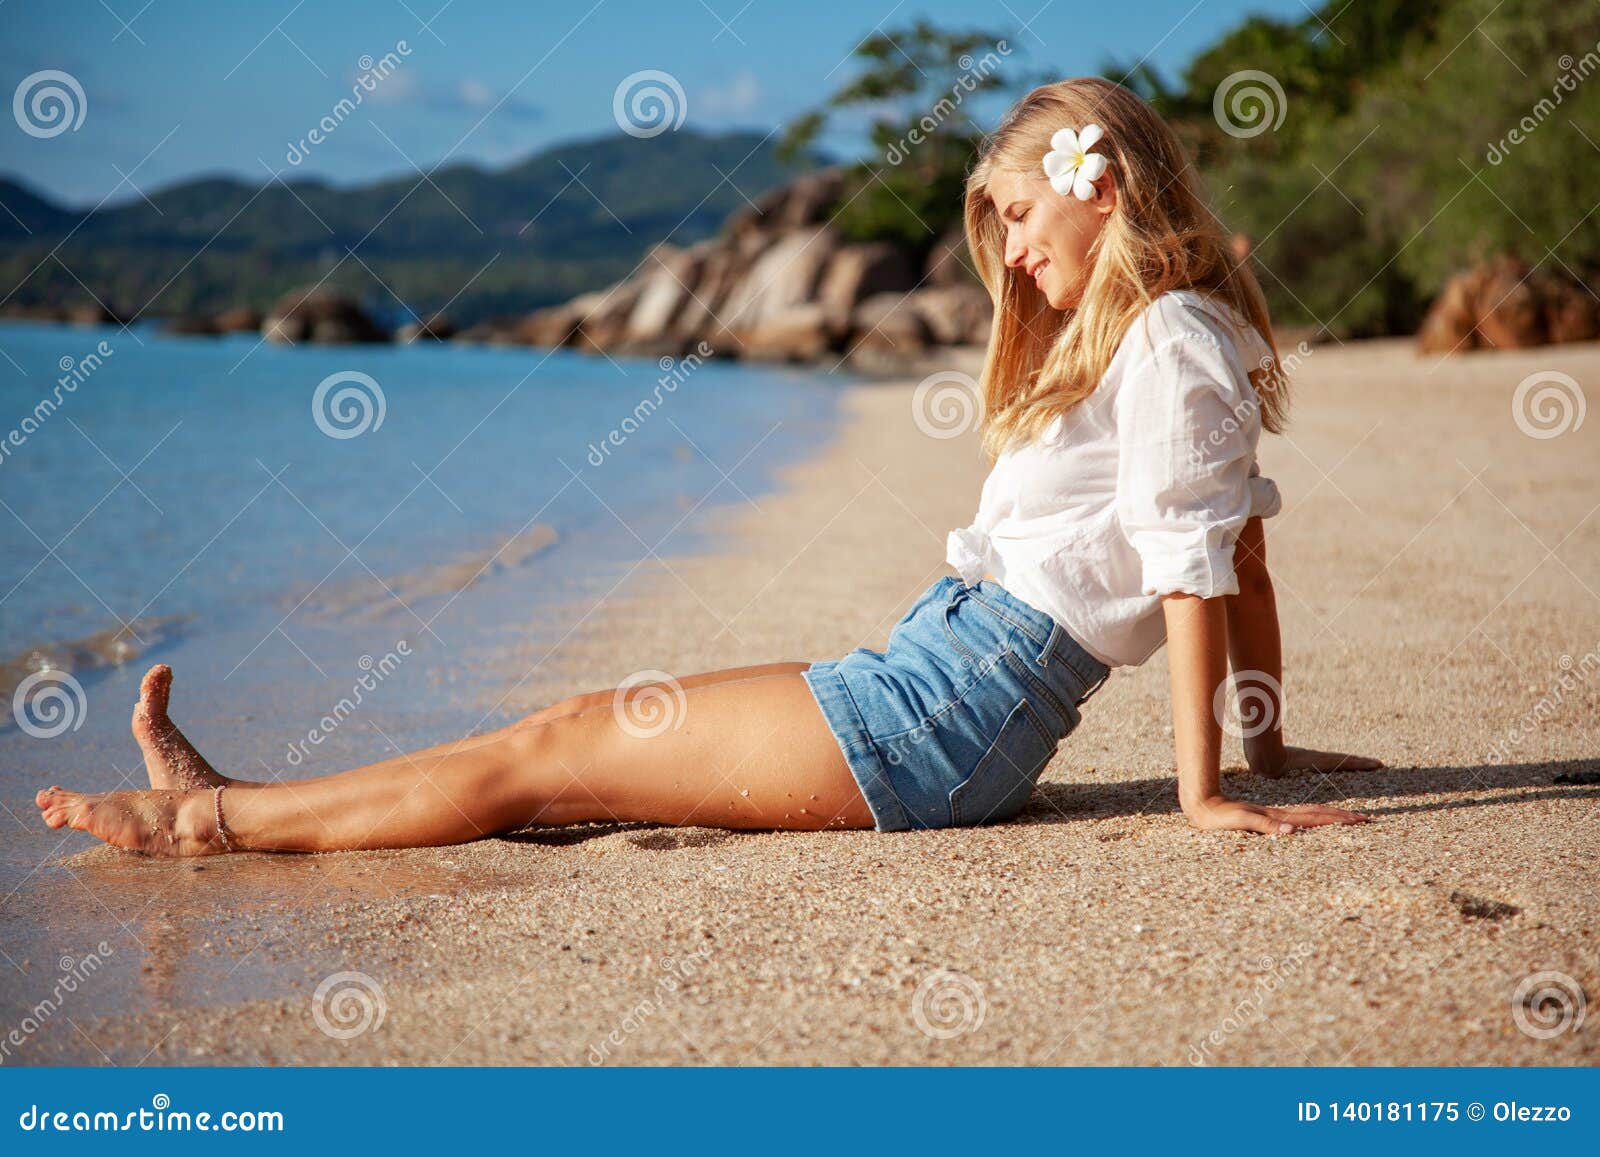 Beautiful Girl In Sea Style Sitting On Sand Travel And Vacation Freedom Concept Stock Image